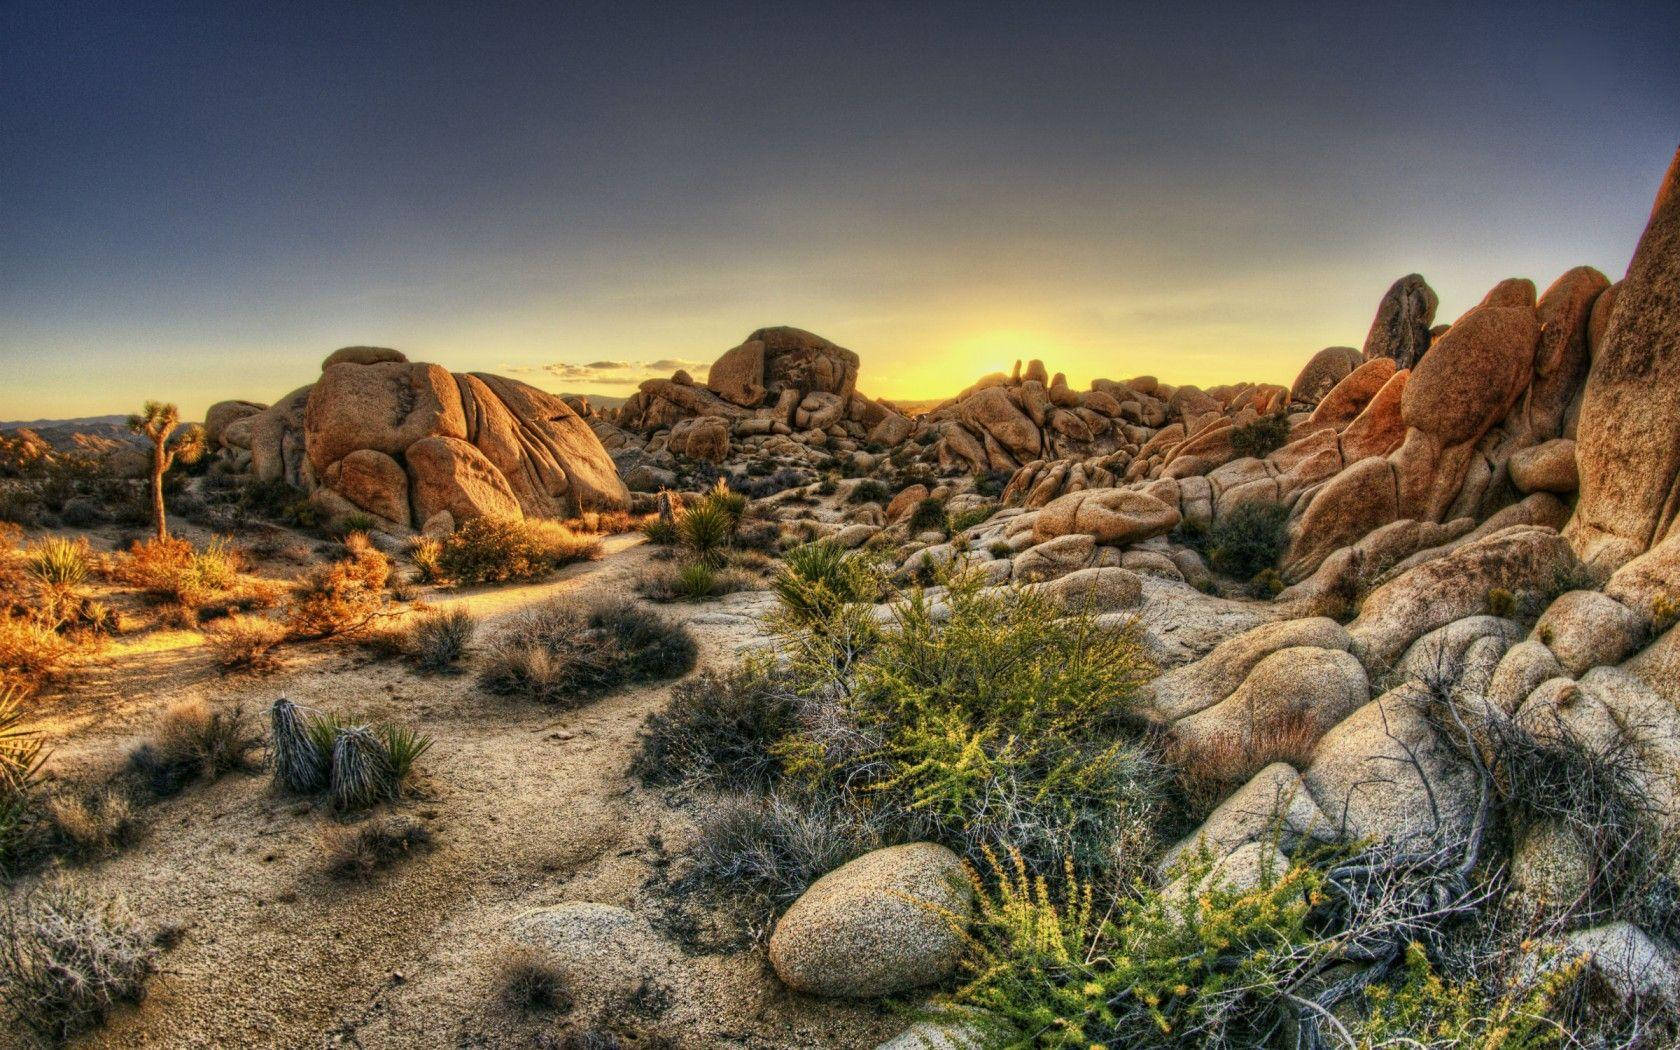 Joshuatree National Park Många Stenar (for A Wallpaper Featuring The Park Landscape With Many Rocks Scattered Throughout) Wallpaper